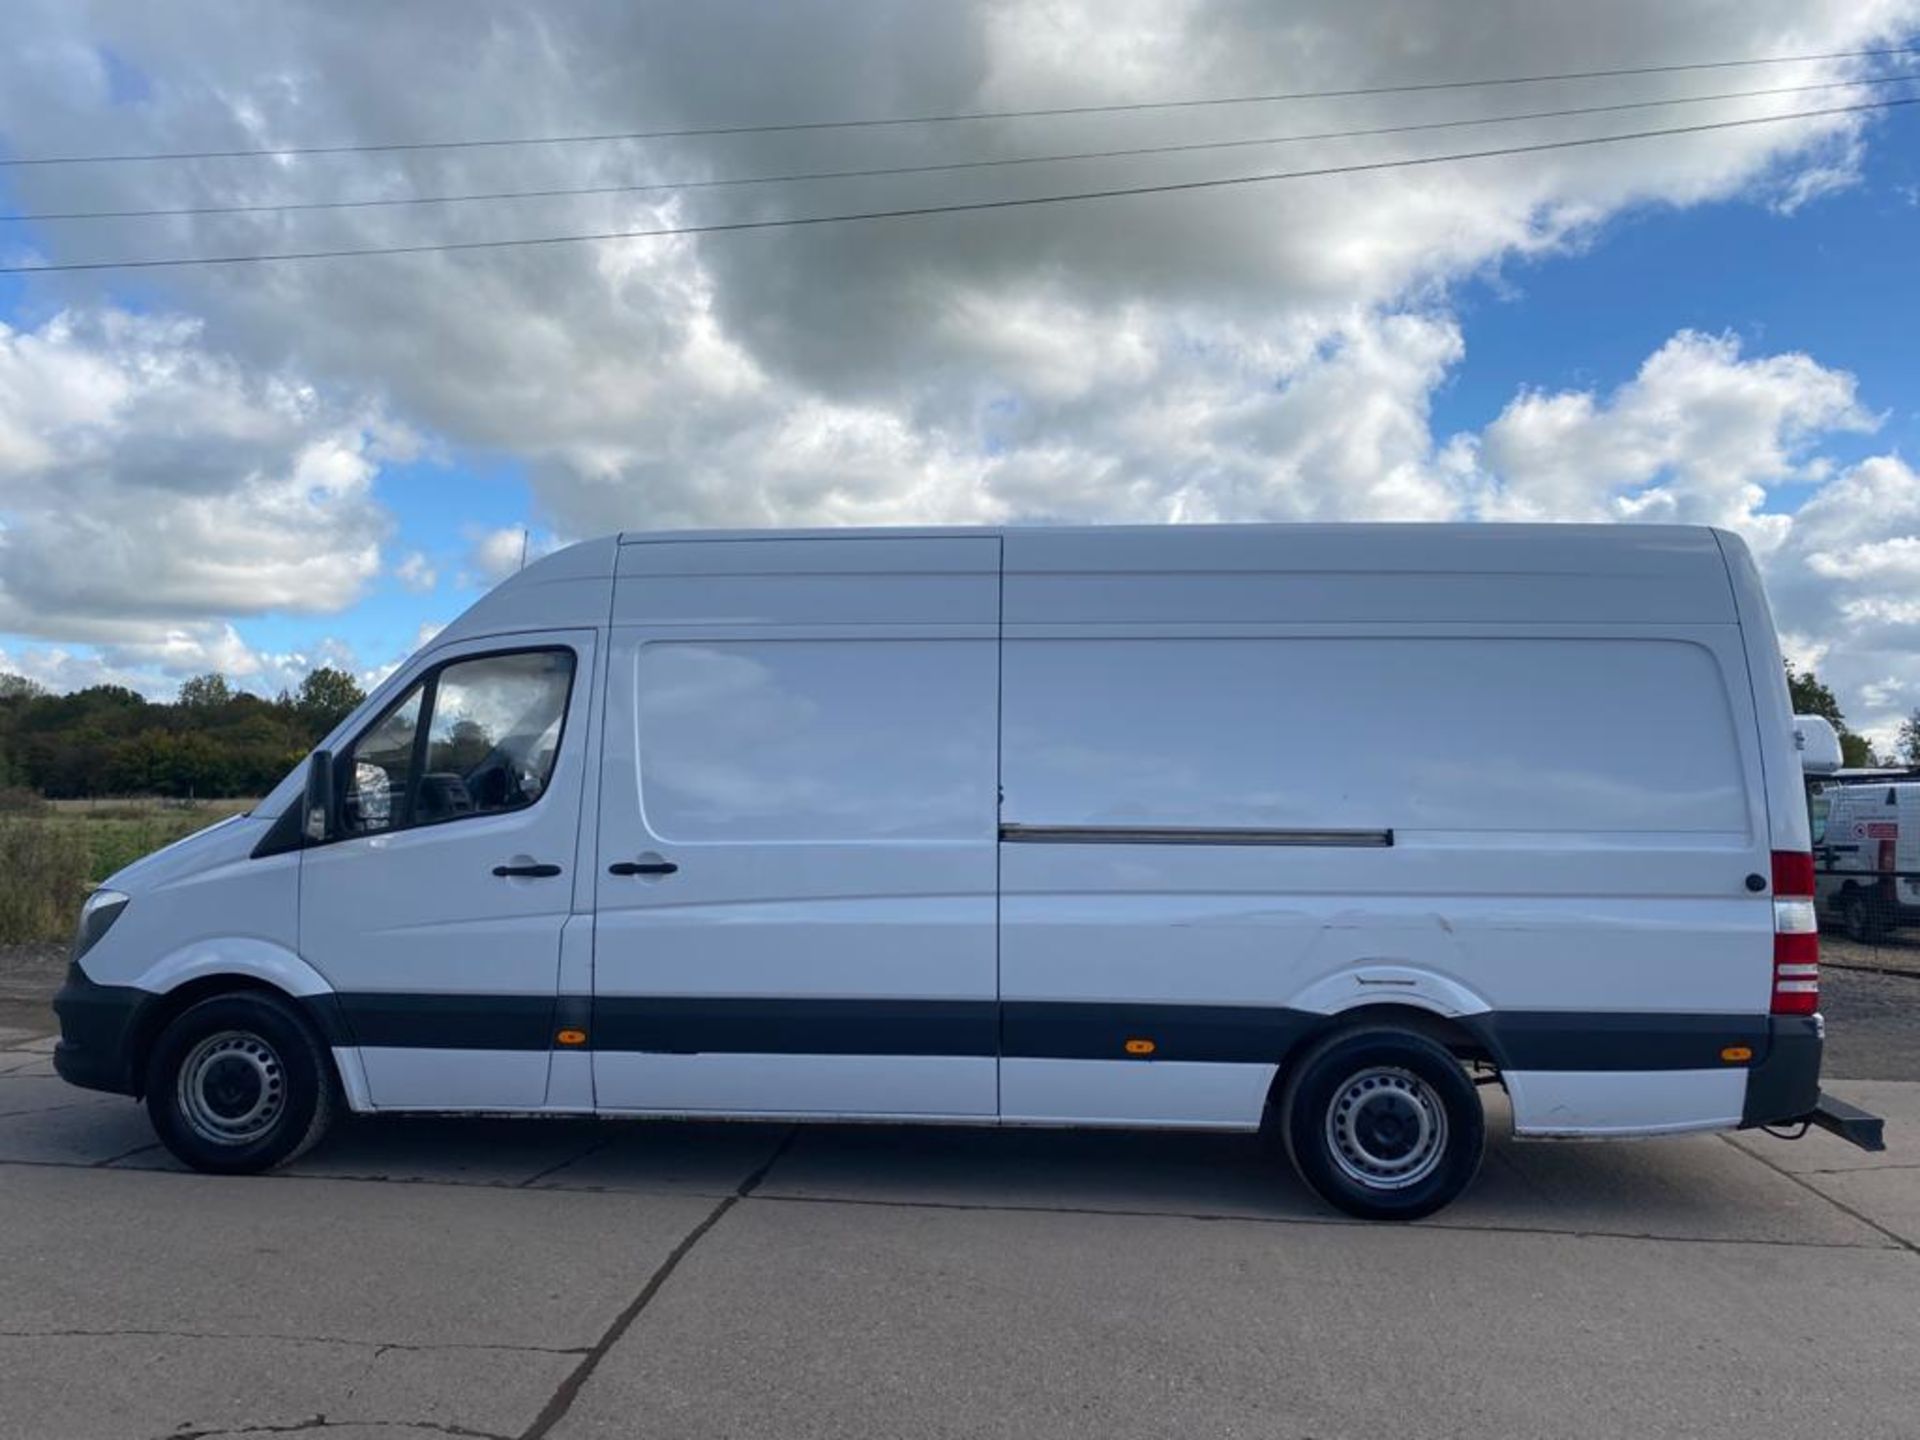 (RESERVE MET)Mercedes Sprinter 313 CDI LWB High Roof - 6 Speed - 2015 Model - Ply Lined - Image 2 of 11